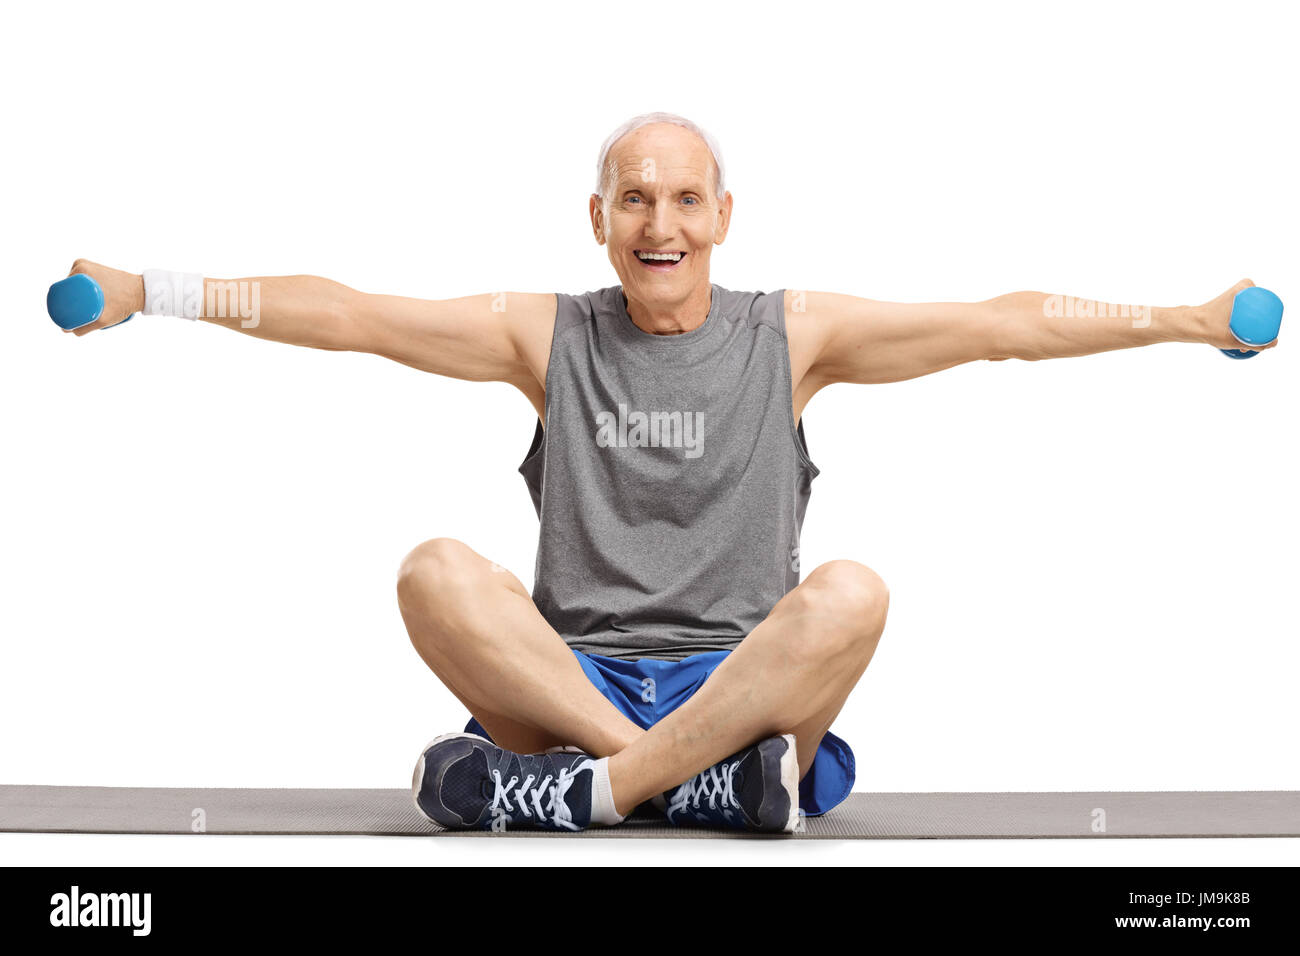 Elderly man lifting dumbbells and sitting on an exercise mat isolated on white background Stock Photo